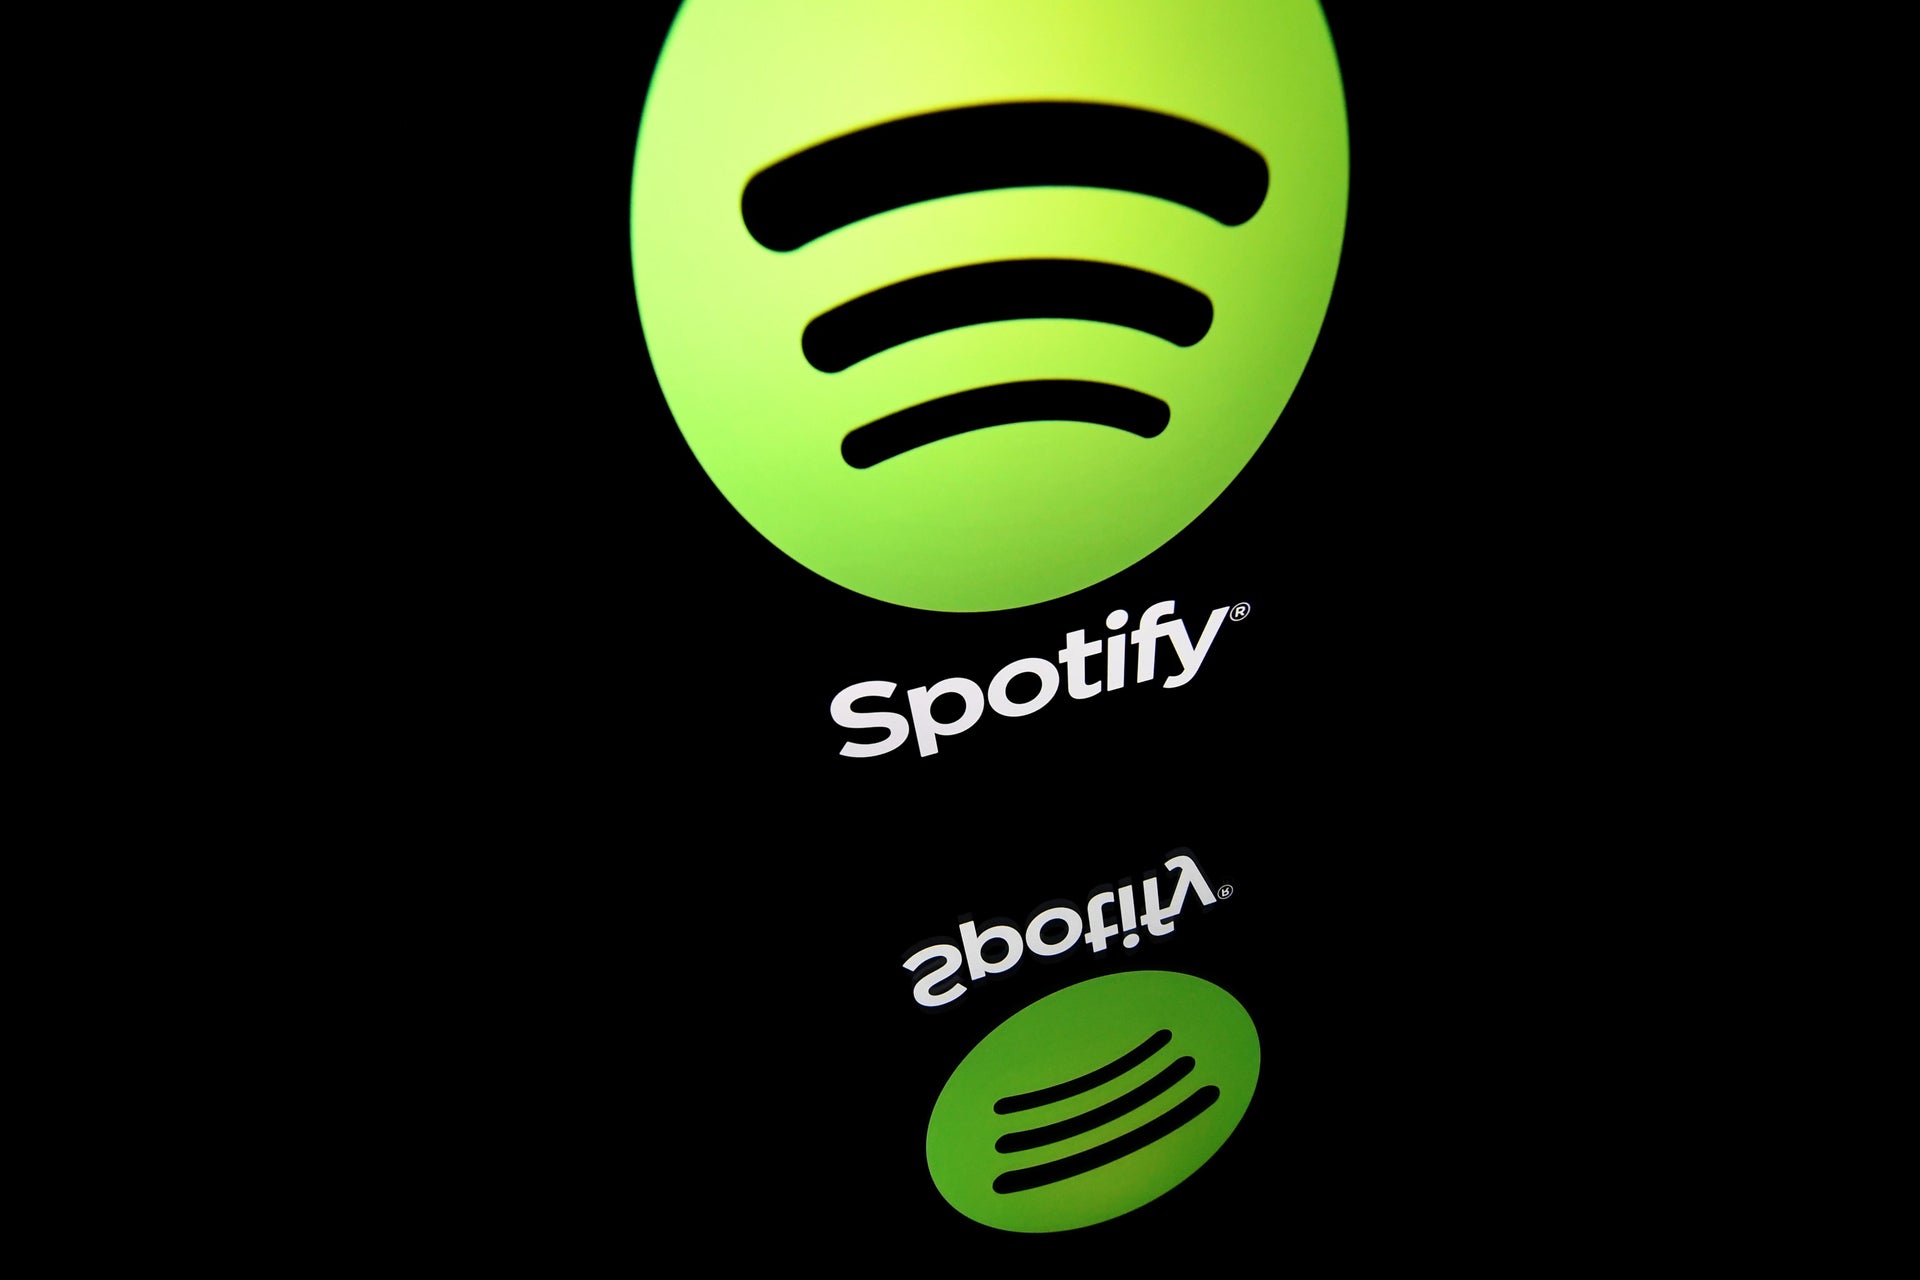 Spotify revokes antihate content policy after backlash.